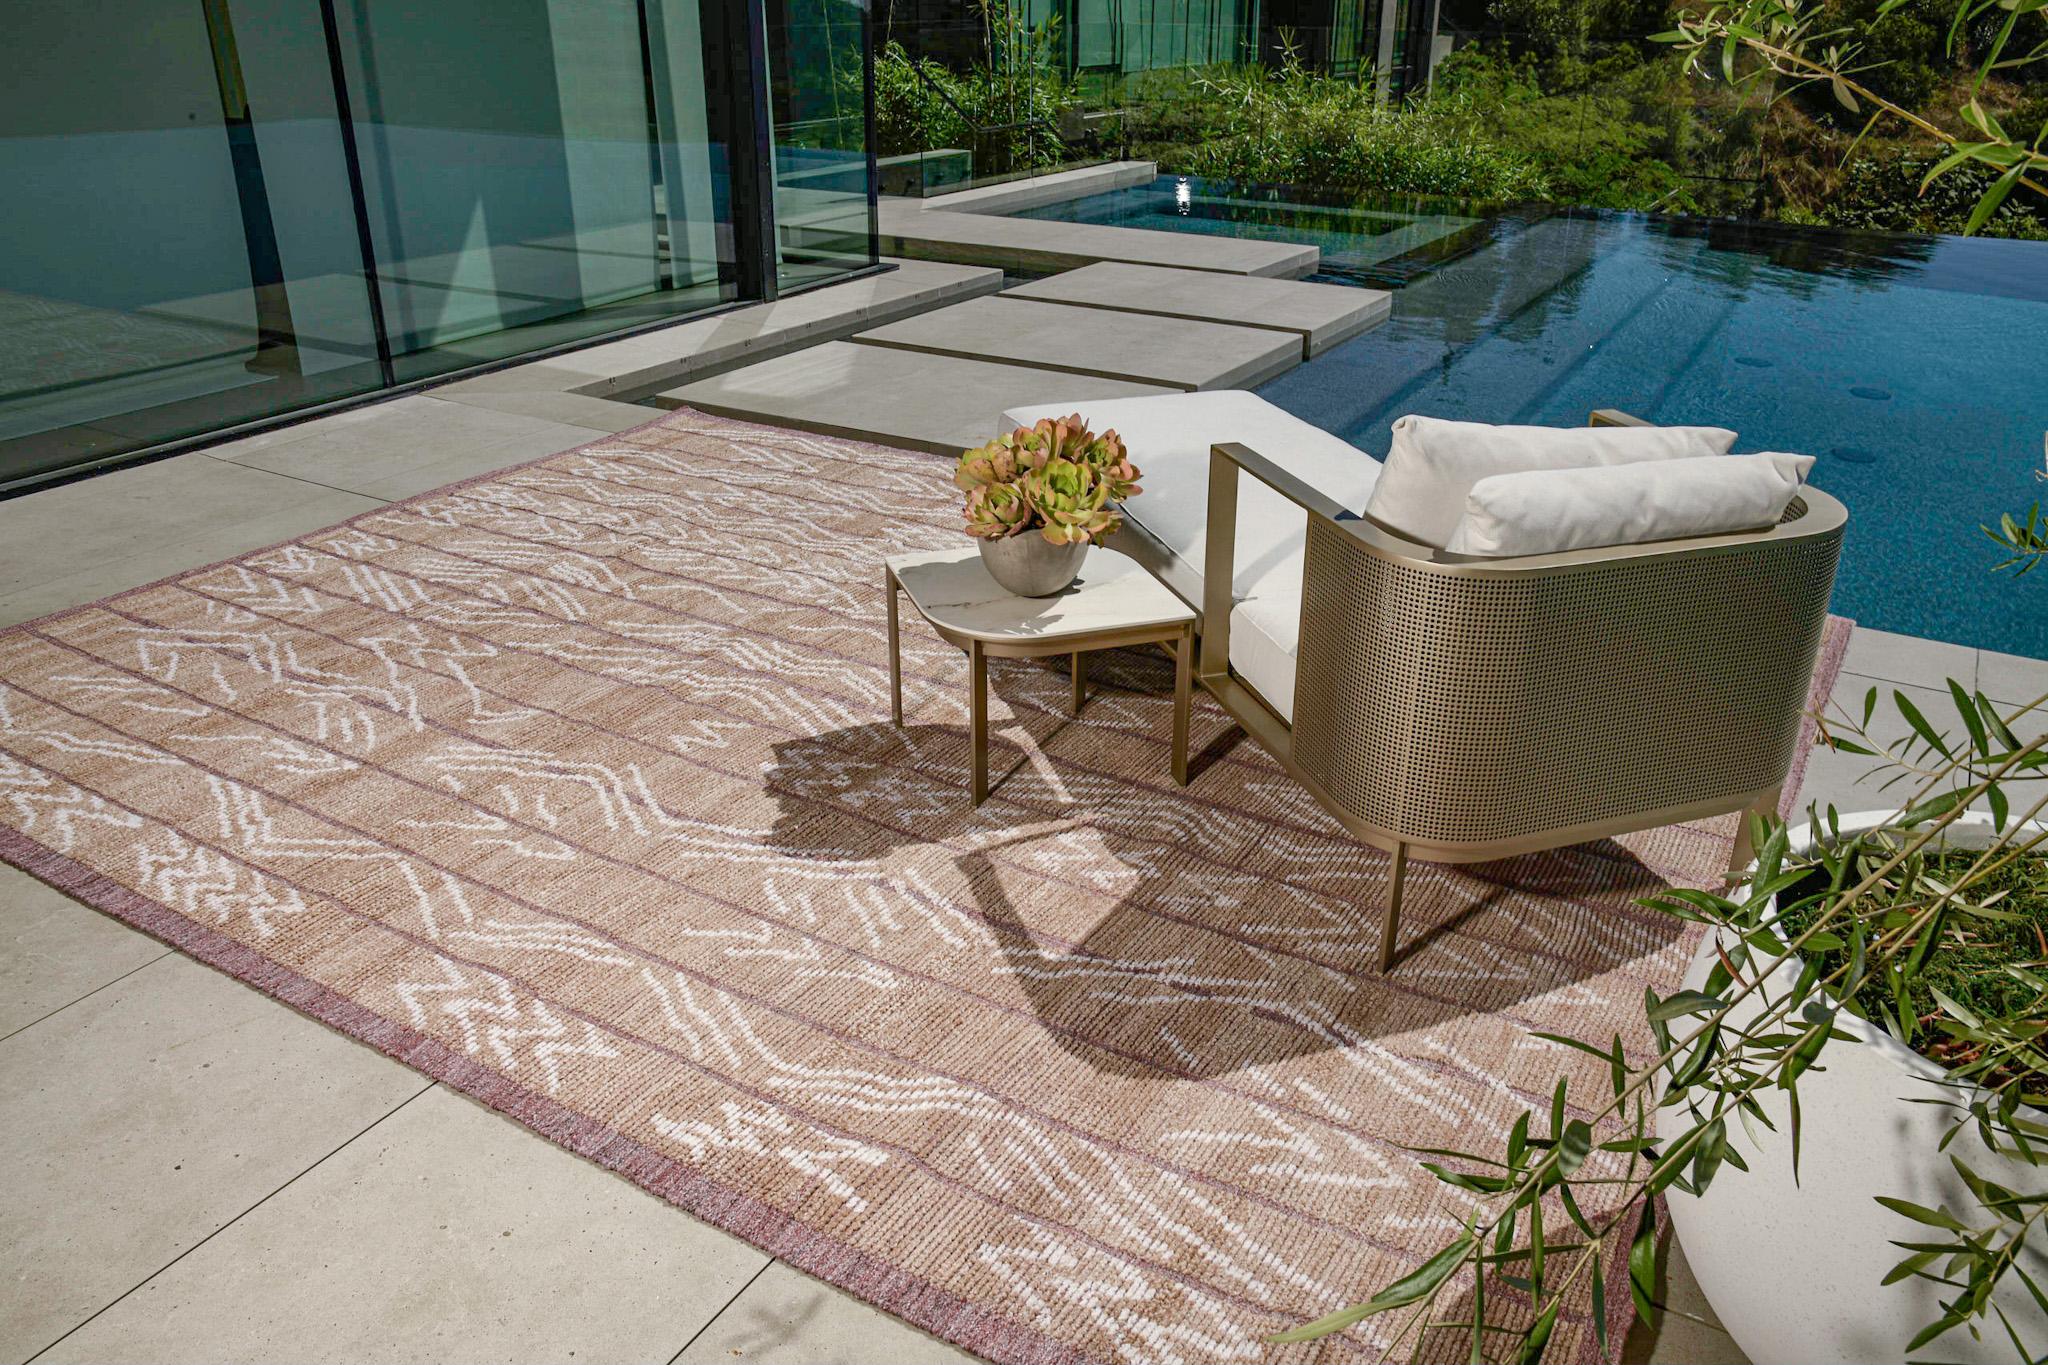 Enjoy the fresh air with Nasim, rugs that work indoors and out.

Rug Number
31444
Size
9' 3